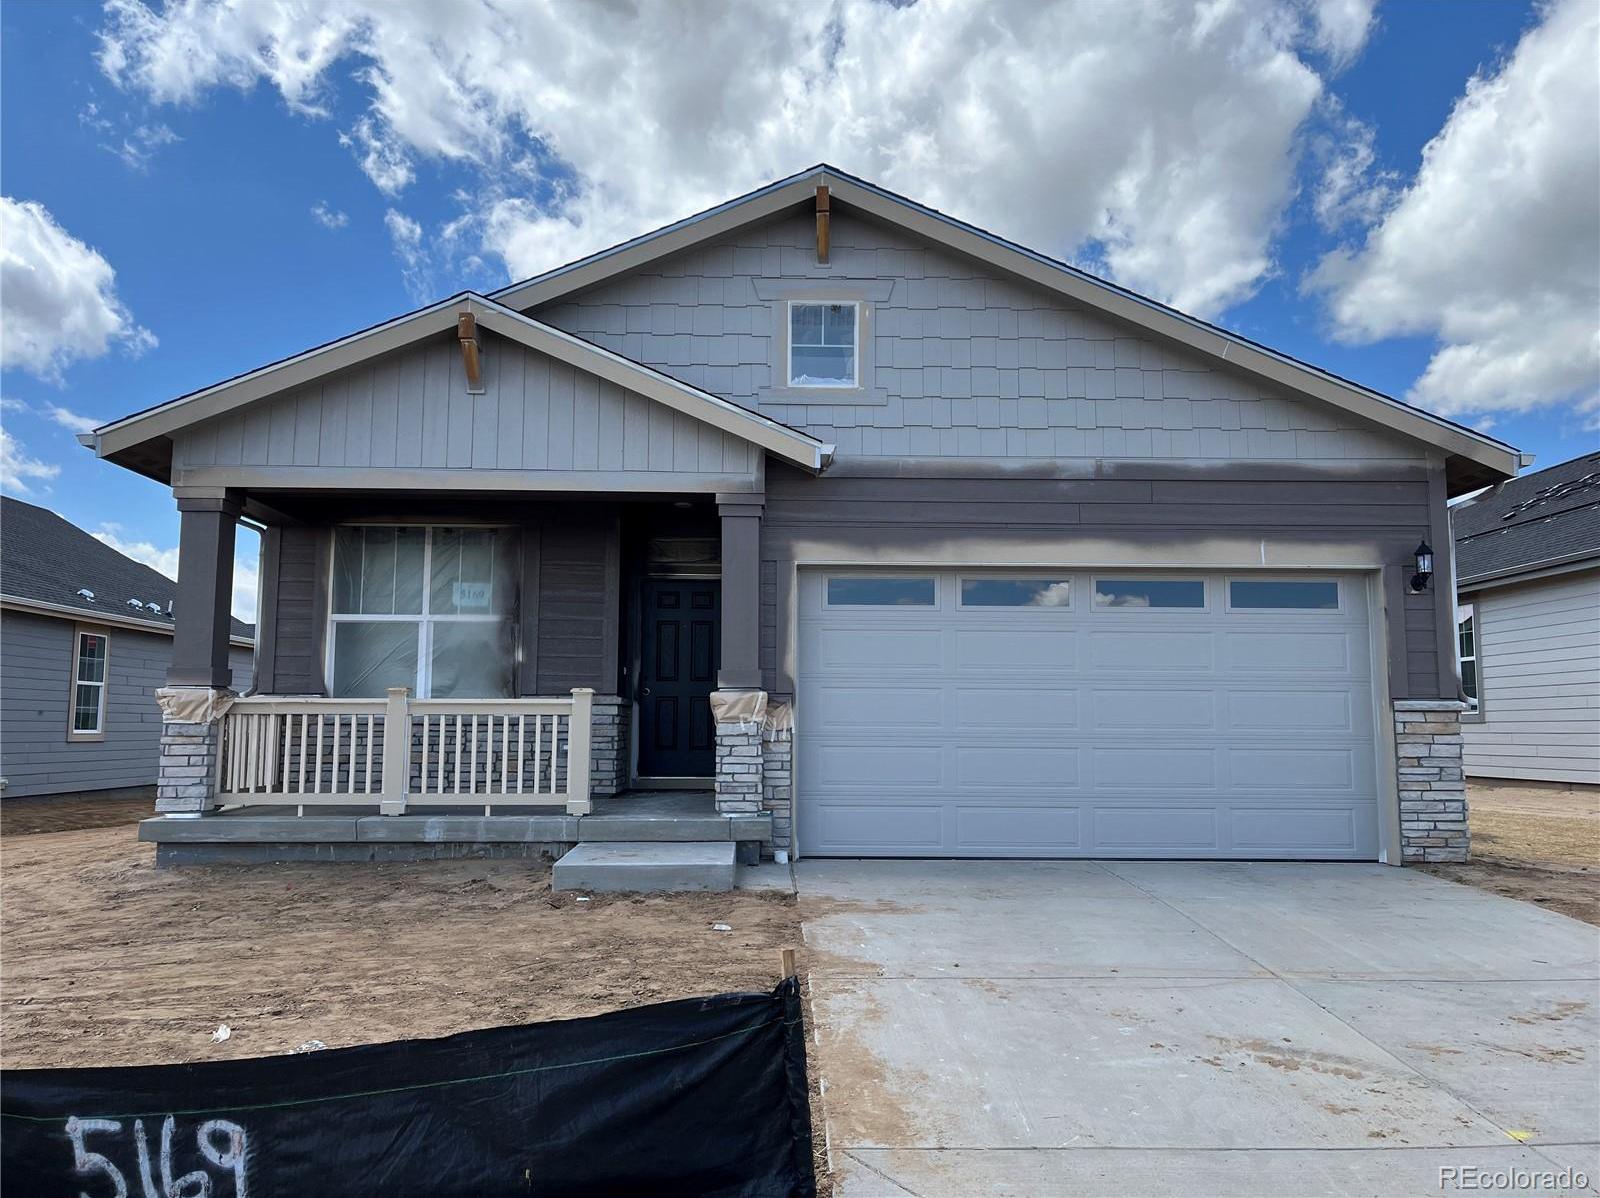 Photo one of 5169 N Quemoy Ct Aurora CO 80019 | MLS 3023664